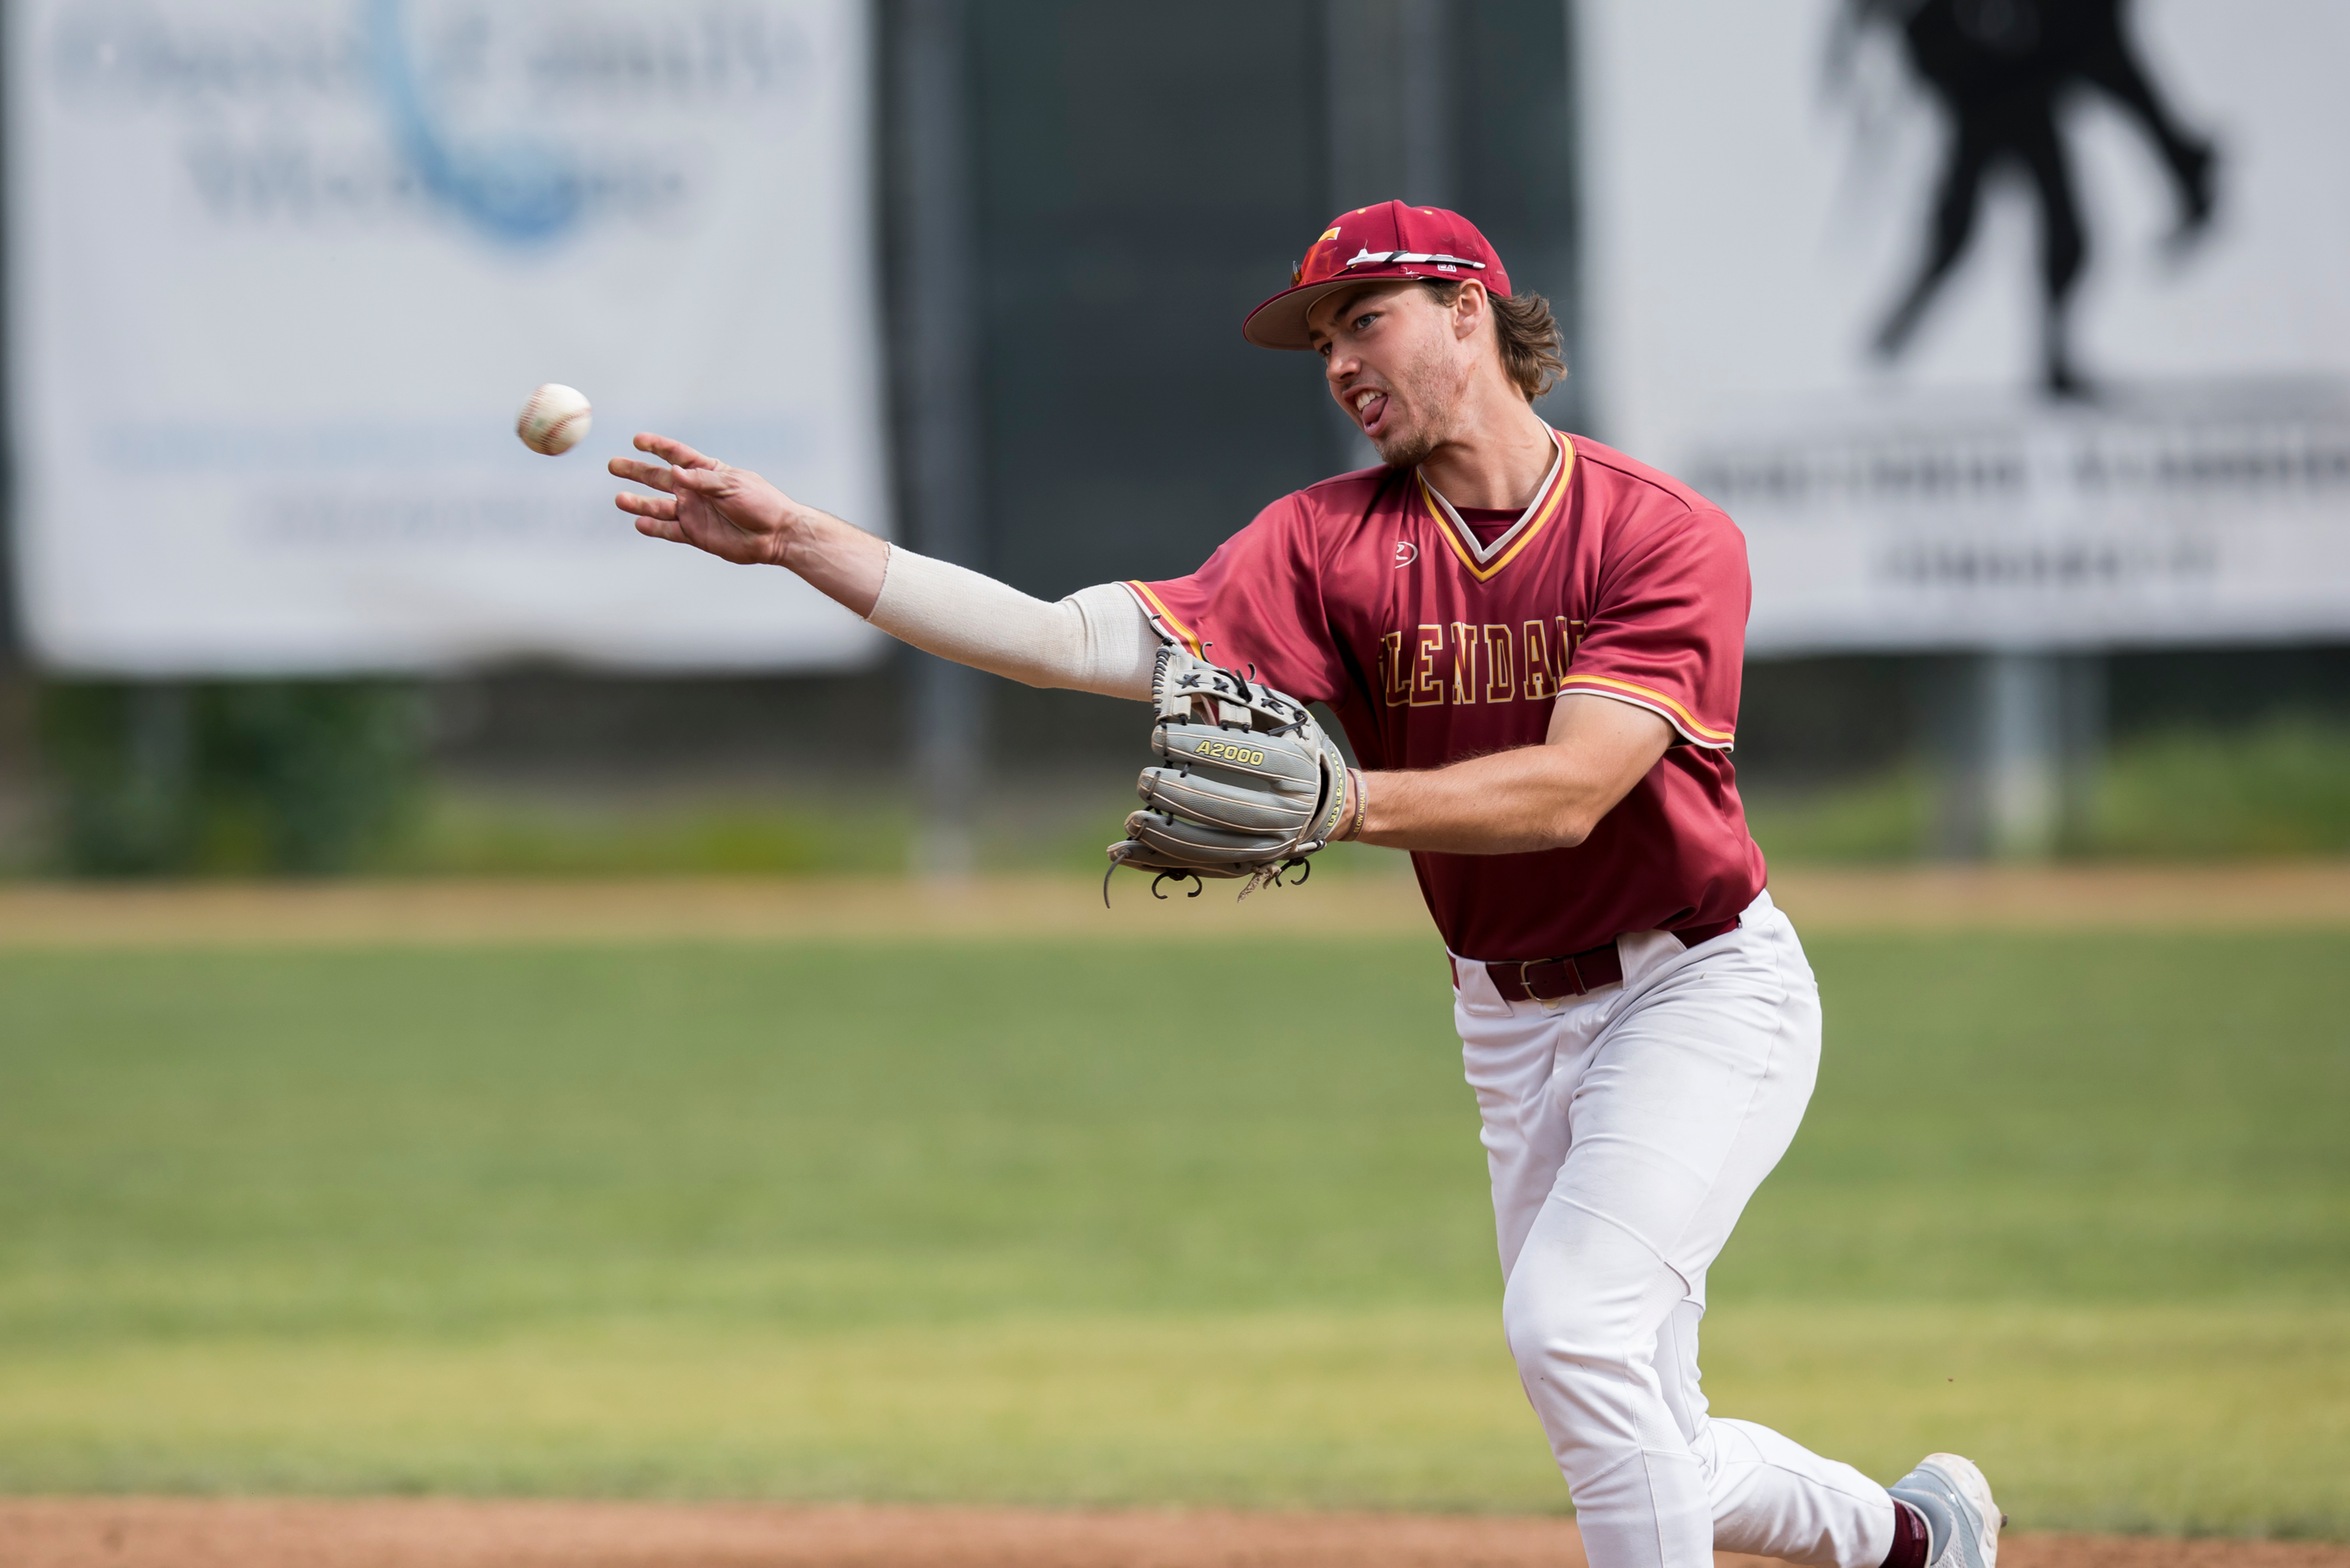 GCC Baseball rallies to beat Canyons 9-8 April 22; Clinches at least a tie for WSC South Title